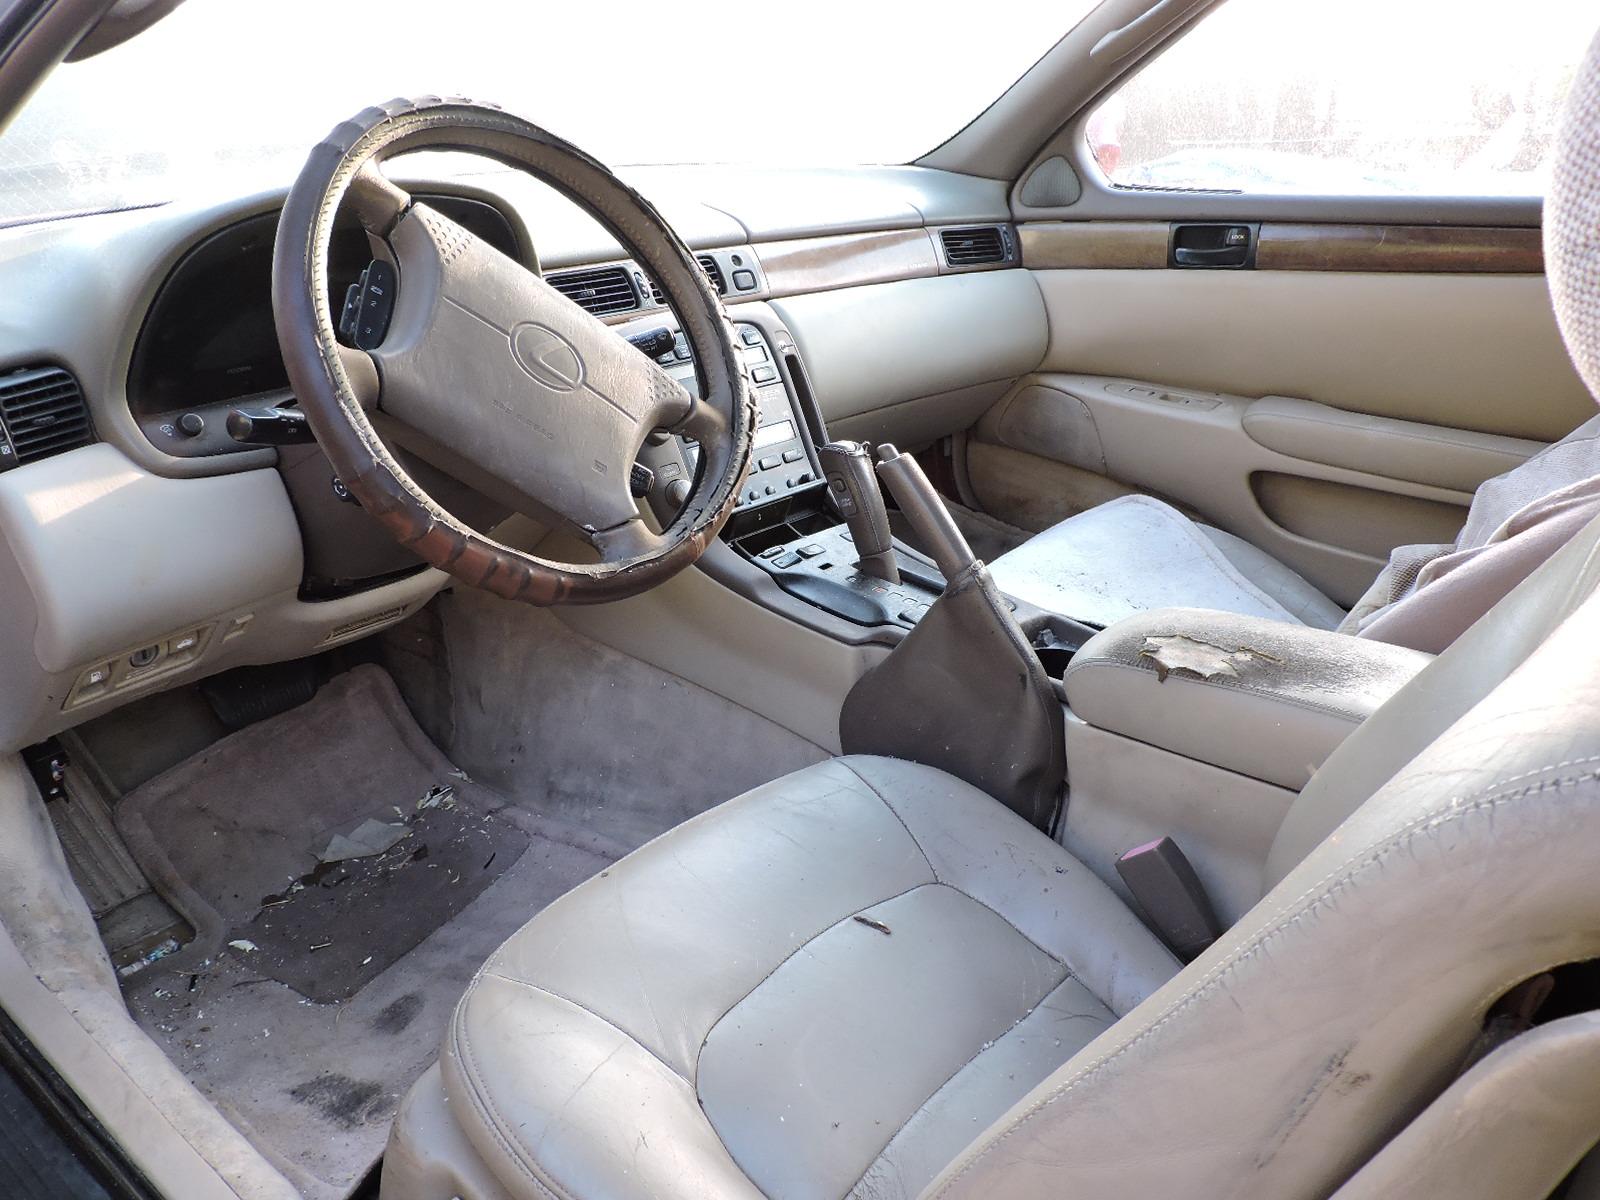 1993 Lexus SC400 Coupe / No Title / Running Condition Unknown